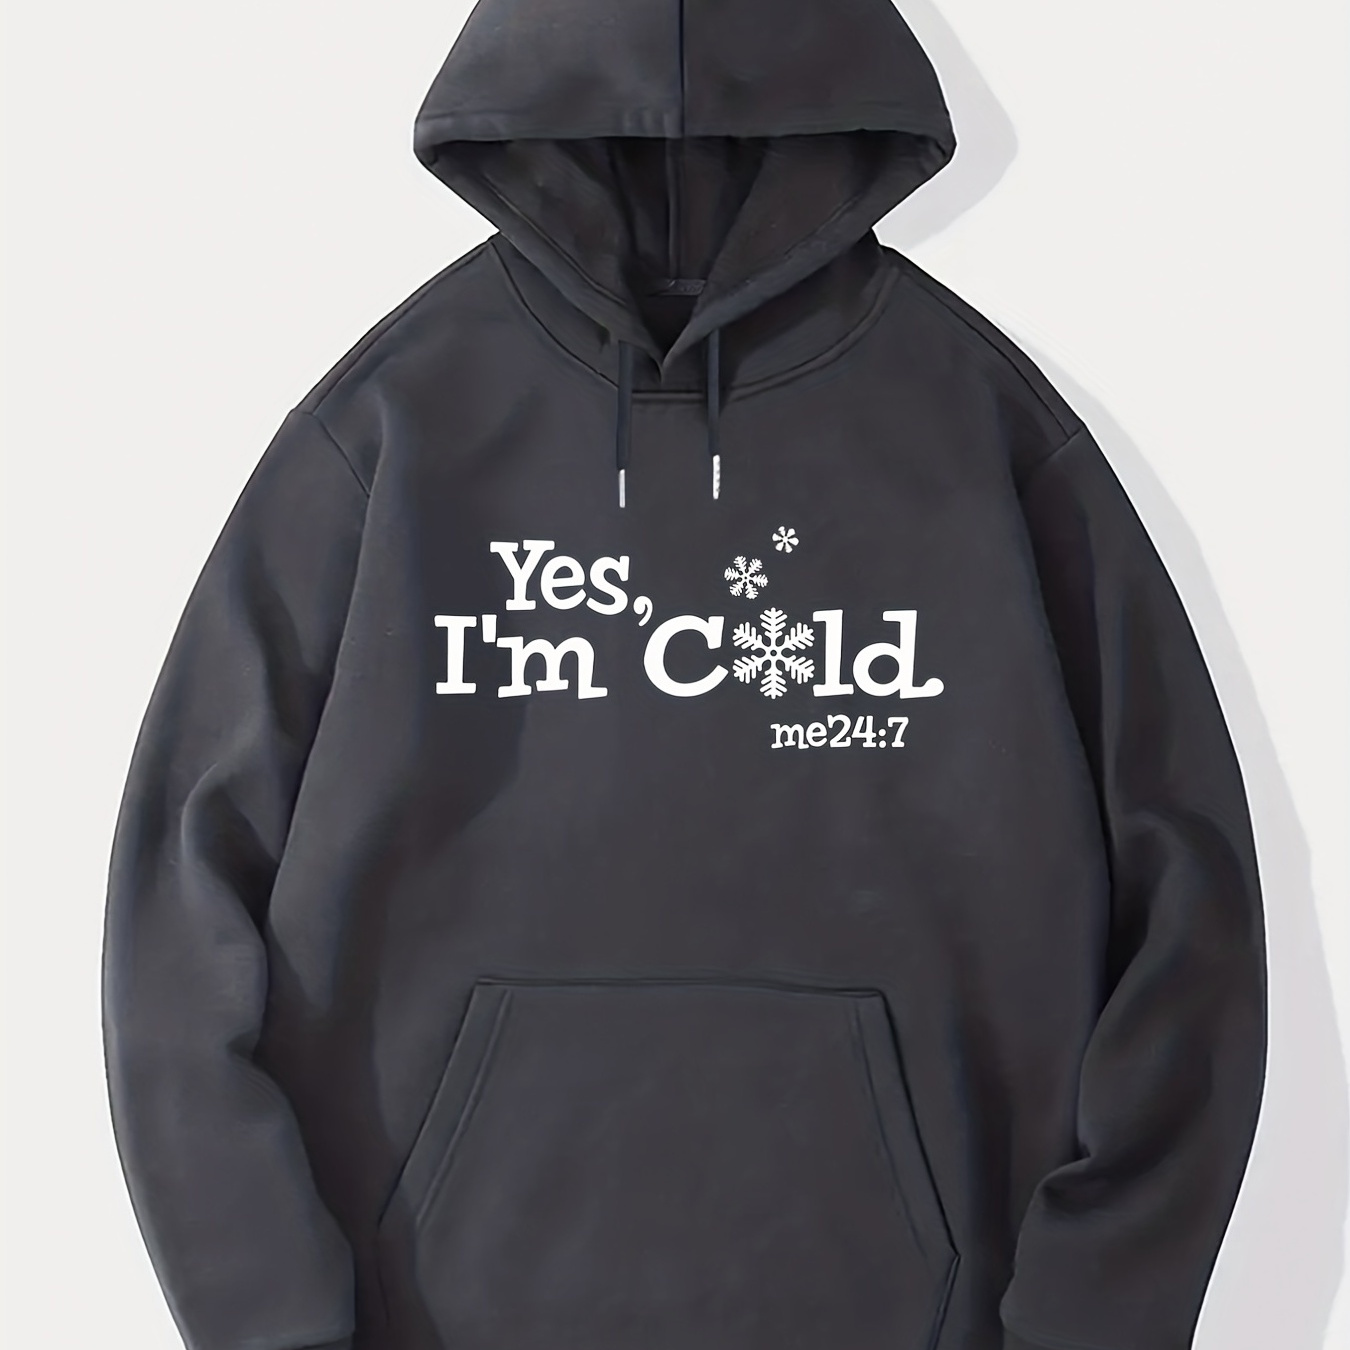 

yes, I'm Cold" Print, Hoodies For Men, Graphic Sweatshirt With Kangaroo Pocket, Comfy Loose Trendy Hooded Pullover, Mens Clothing For Fall Winter